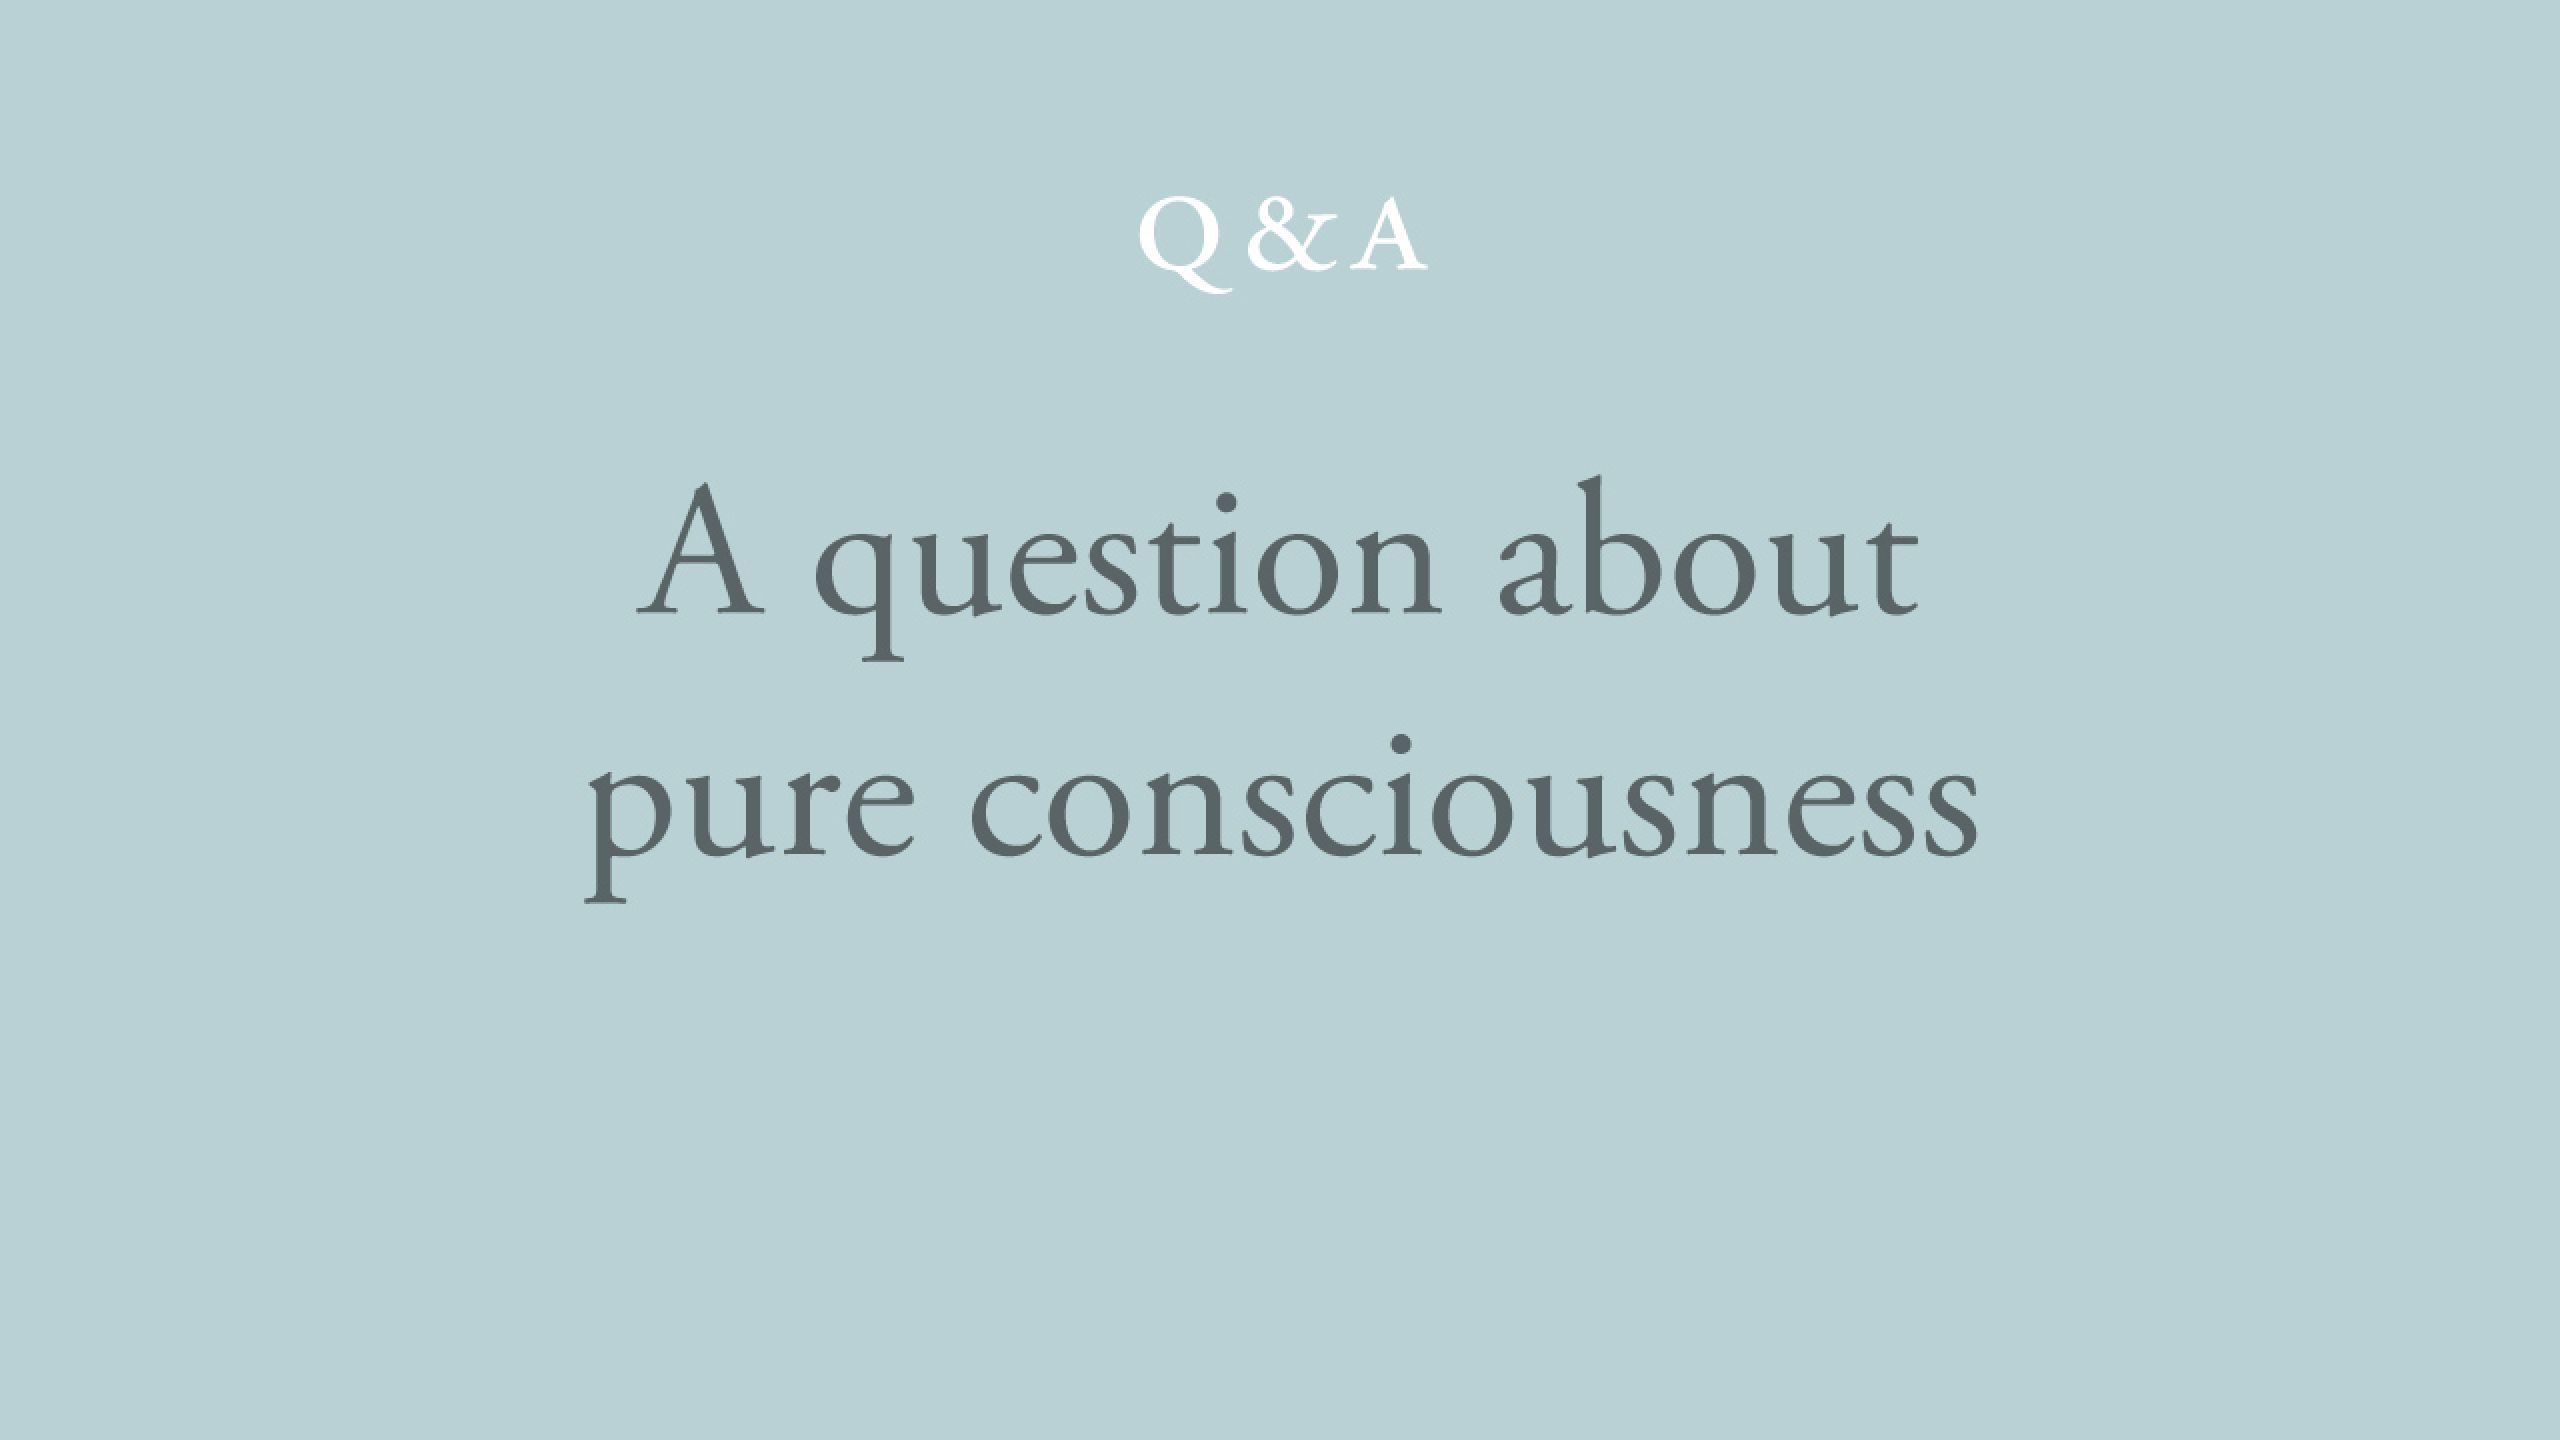 If I am not thinking while awake, is my experience one of pure consciousness?